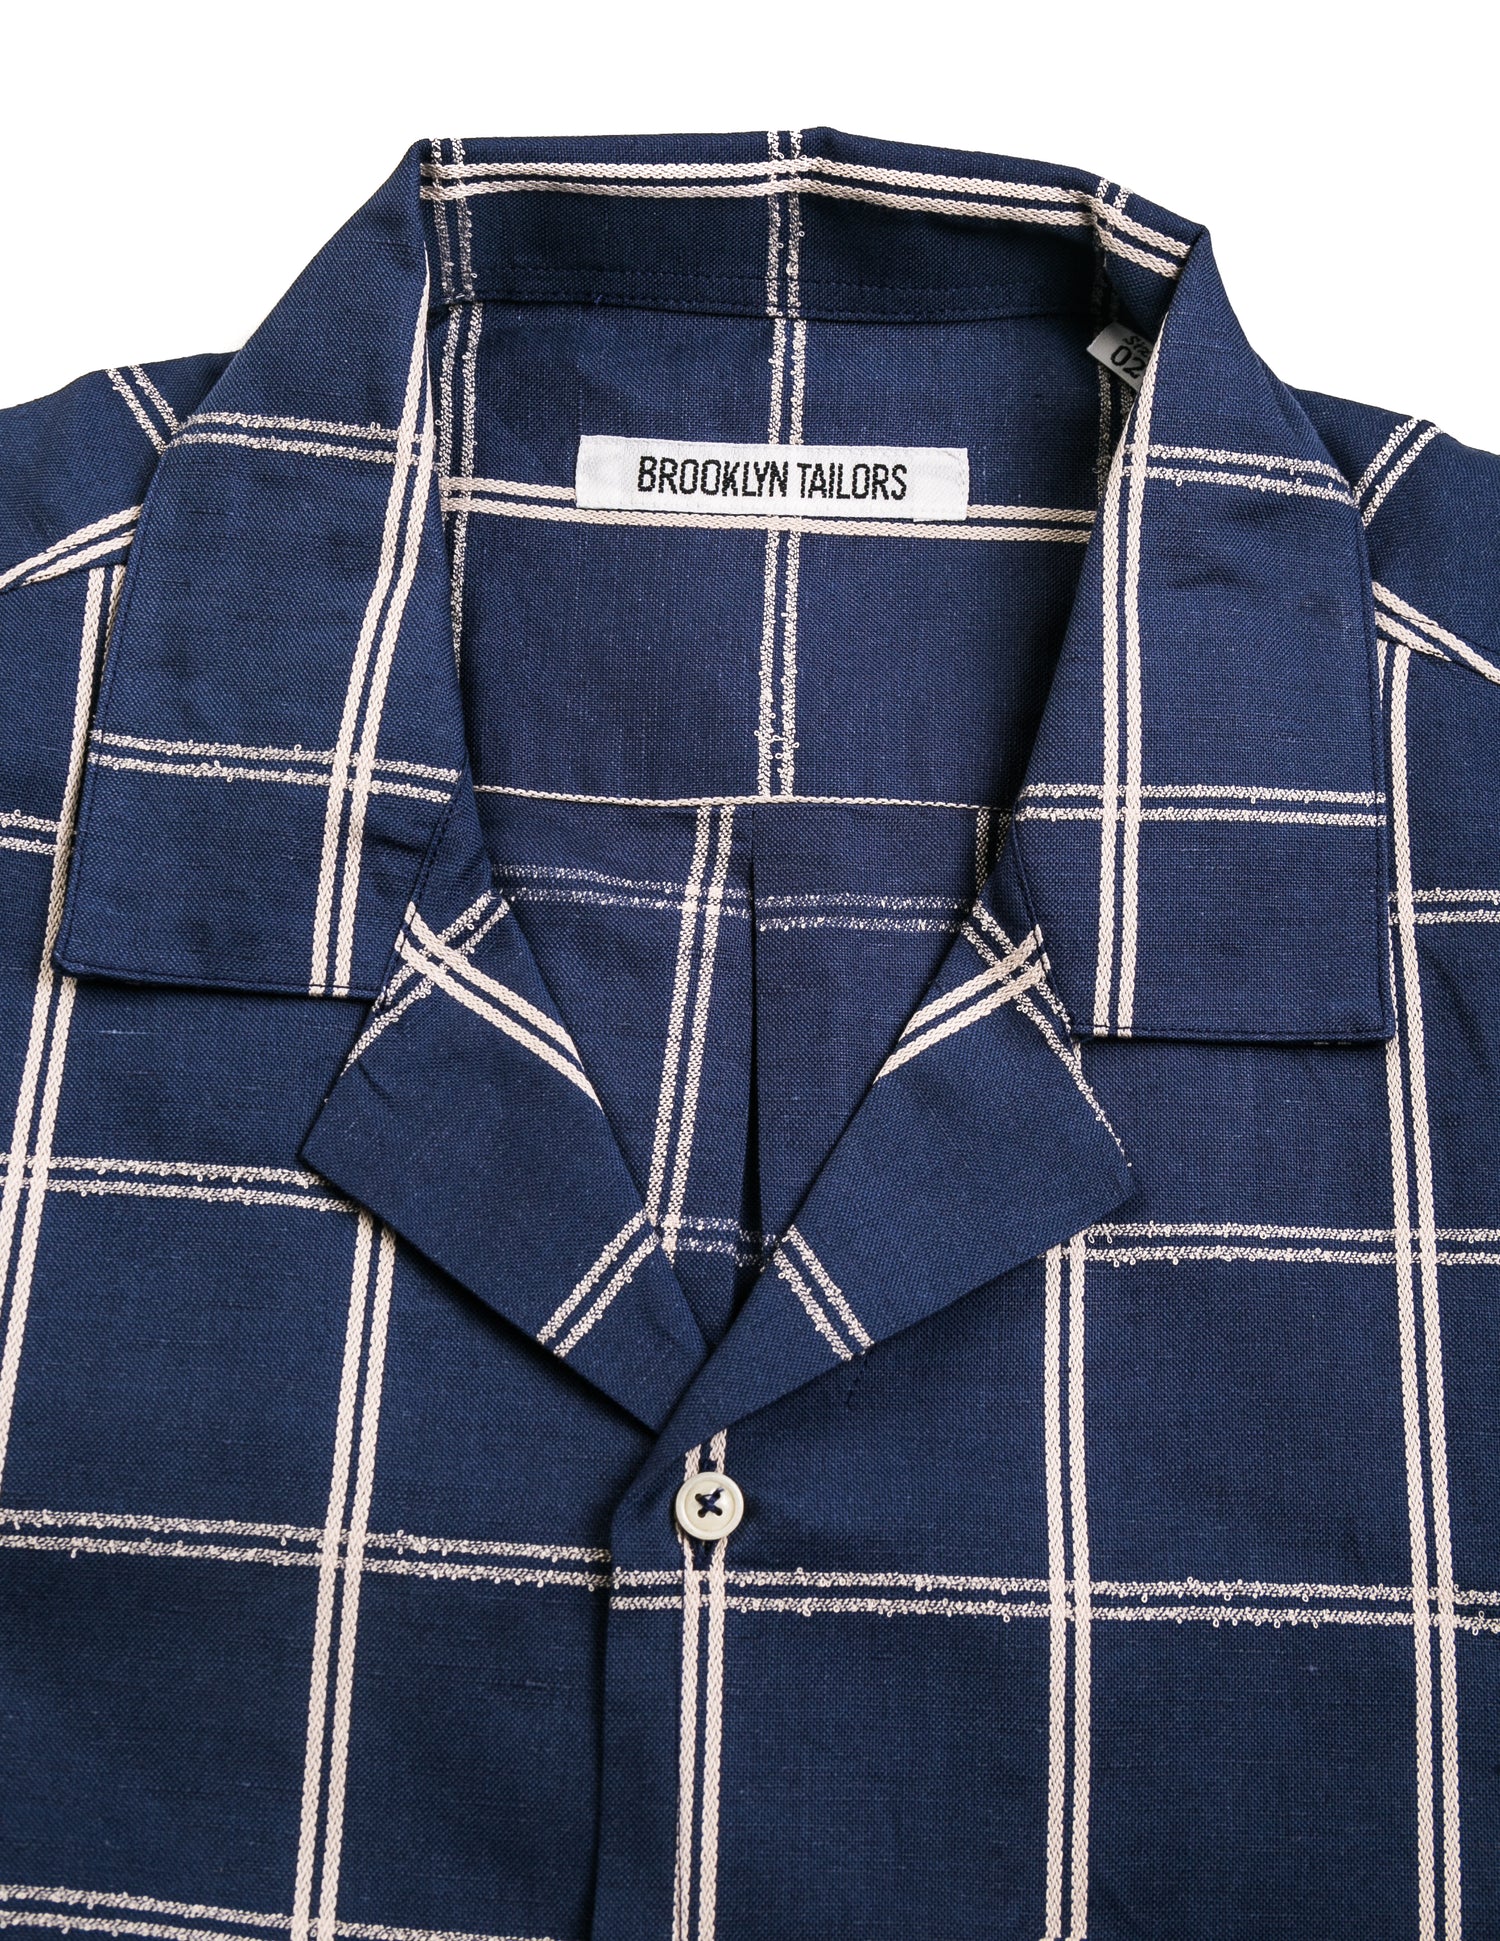 Detail of camp collar on Brooklyn Tailors BKT18 Camp Shirt in Blue Windowpane